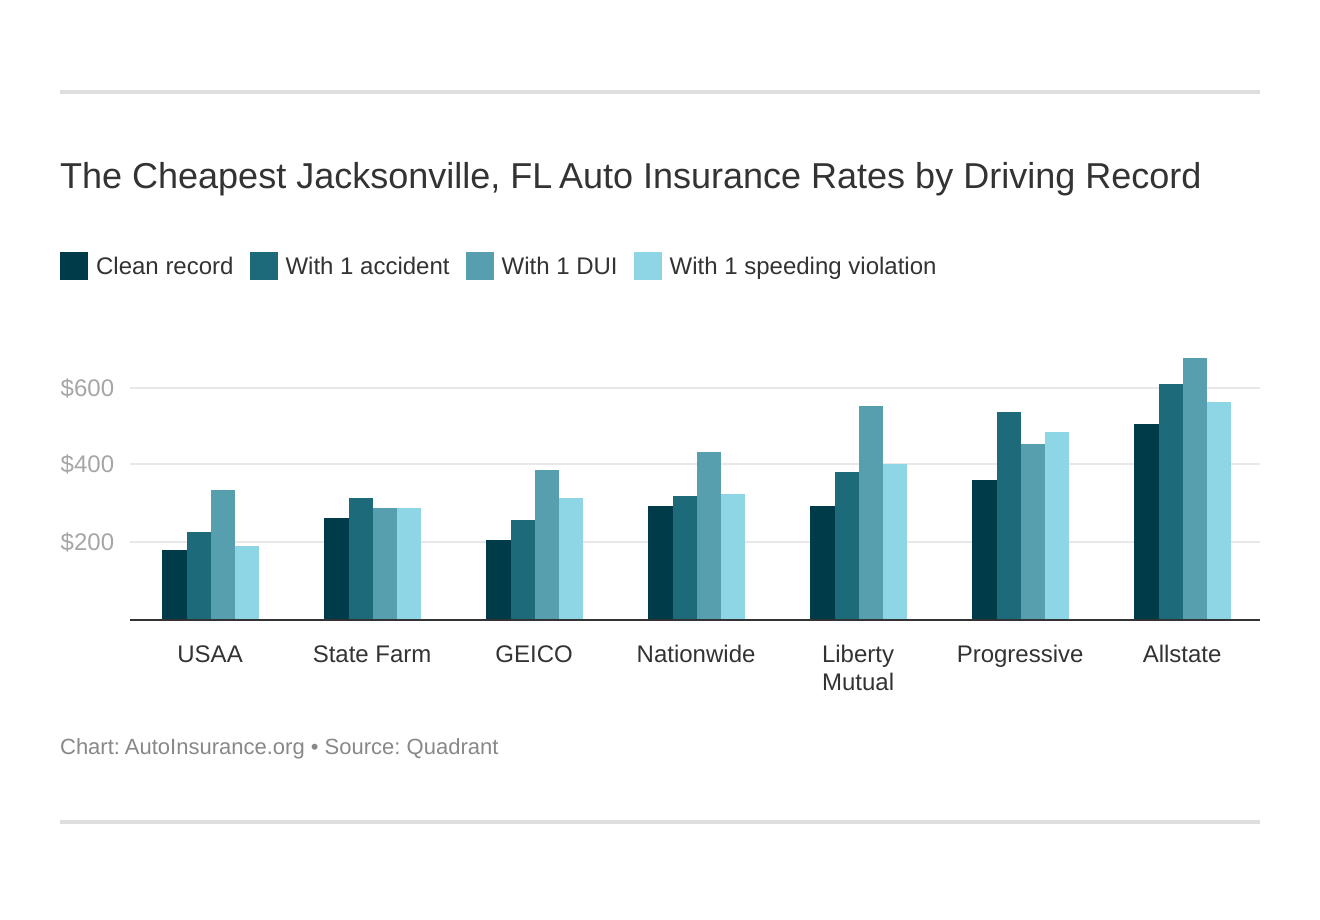 The Cheapest Jacksonville, FL Auto Insurance Rates by Driving Record